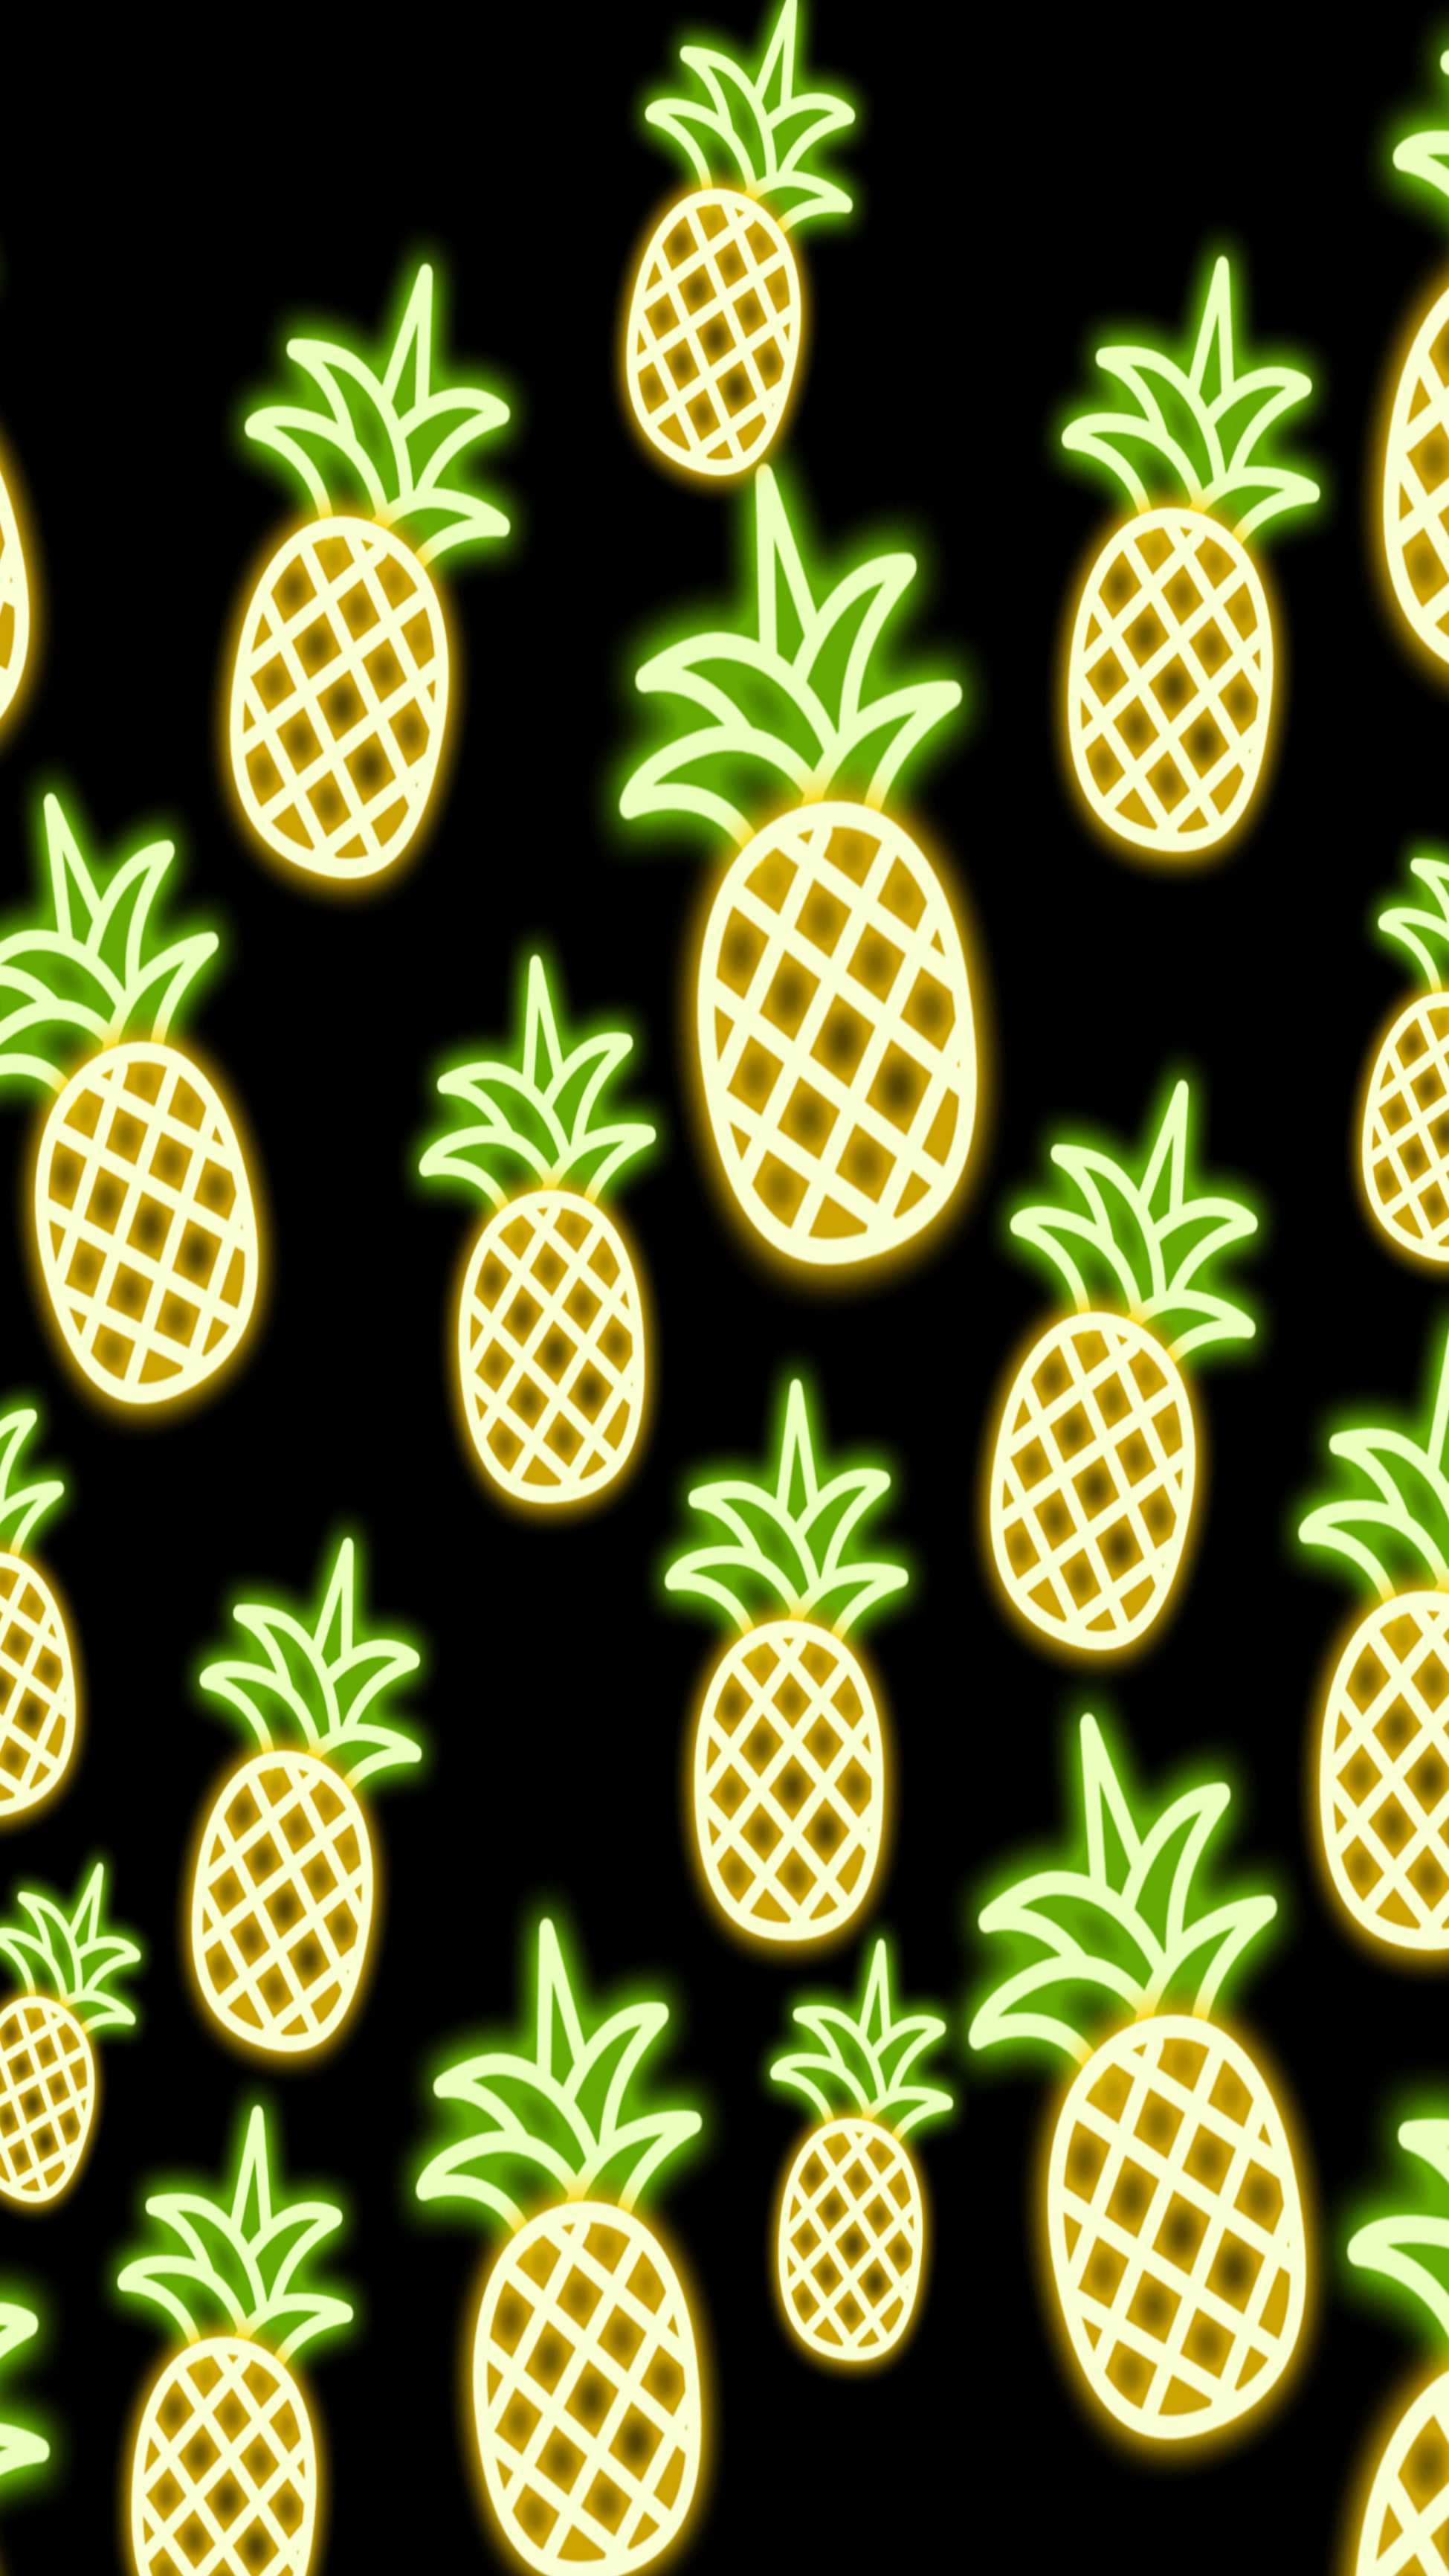 A pattern of neon pineapples on a black background - Pineapple